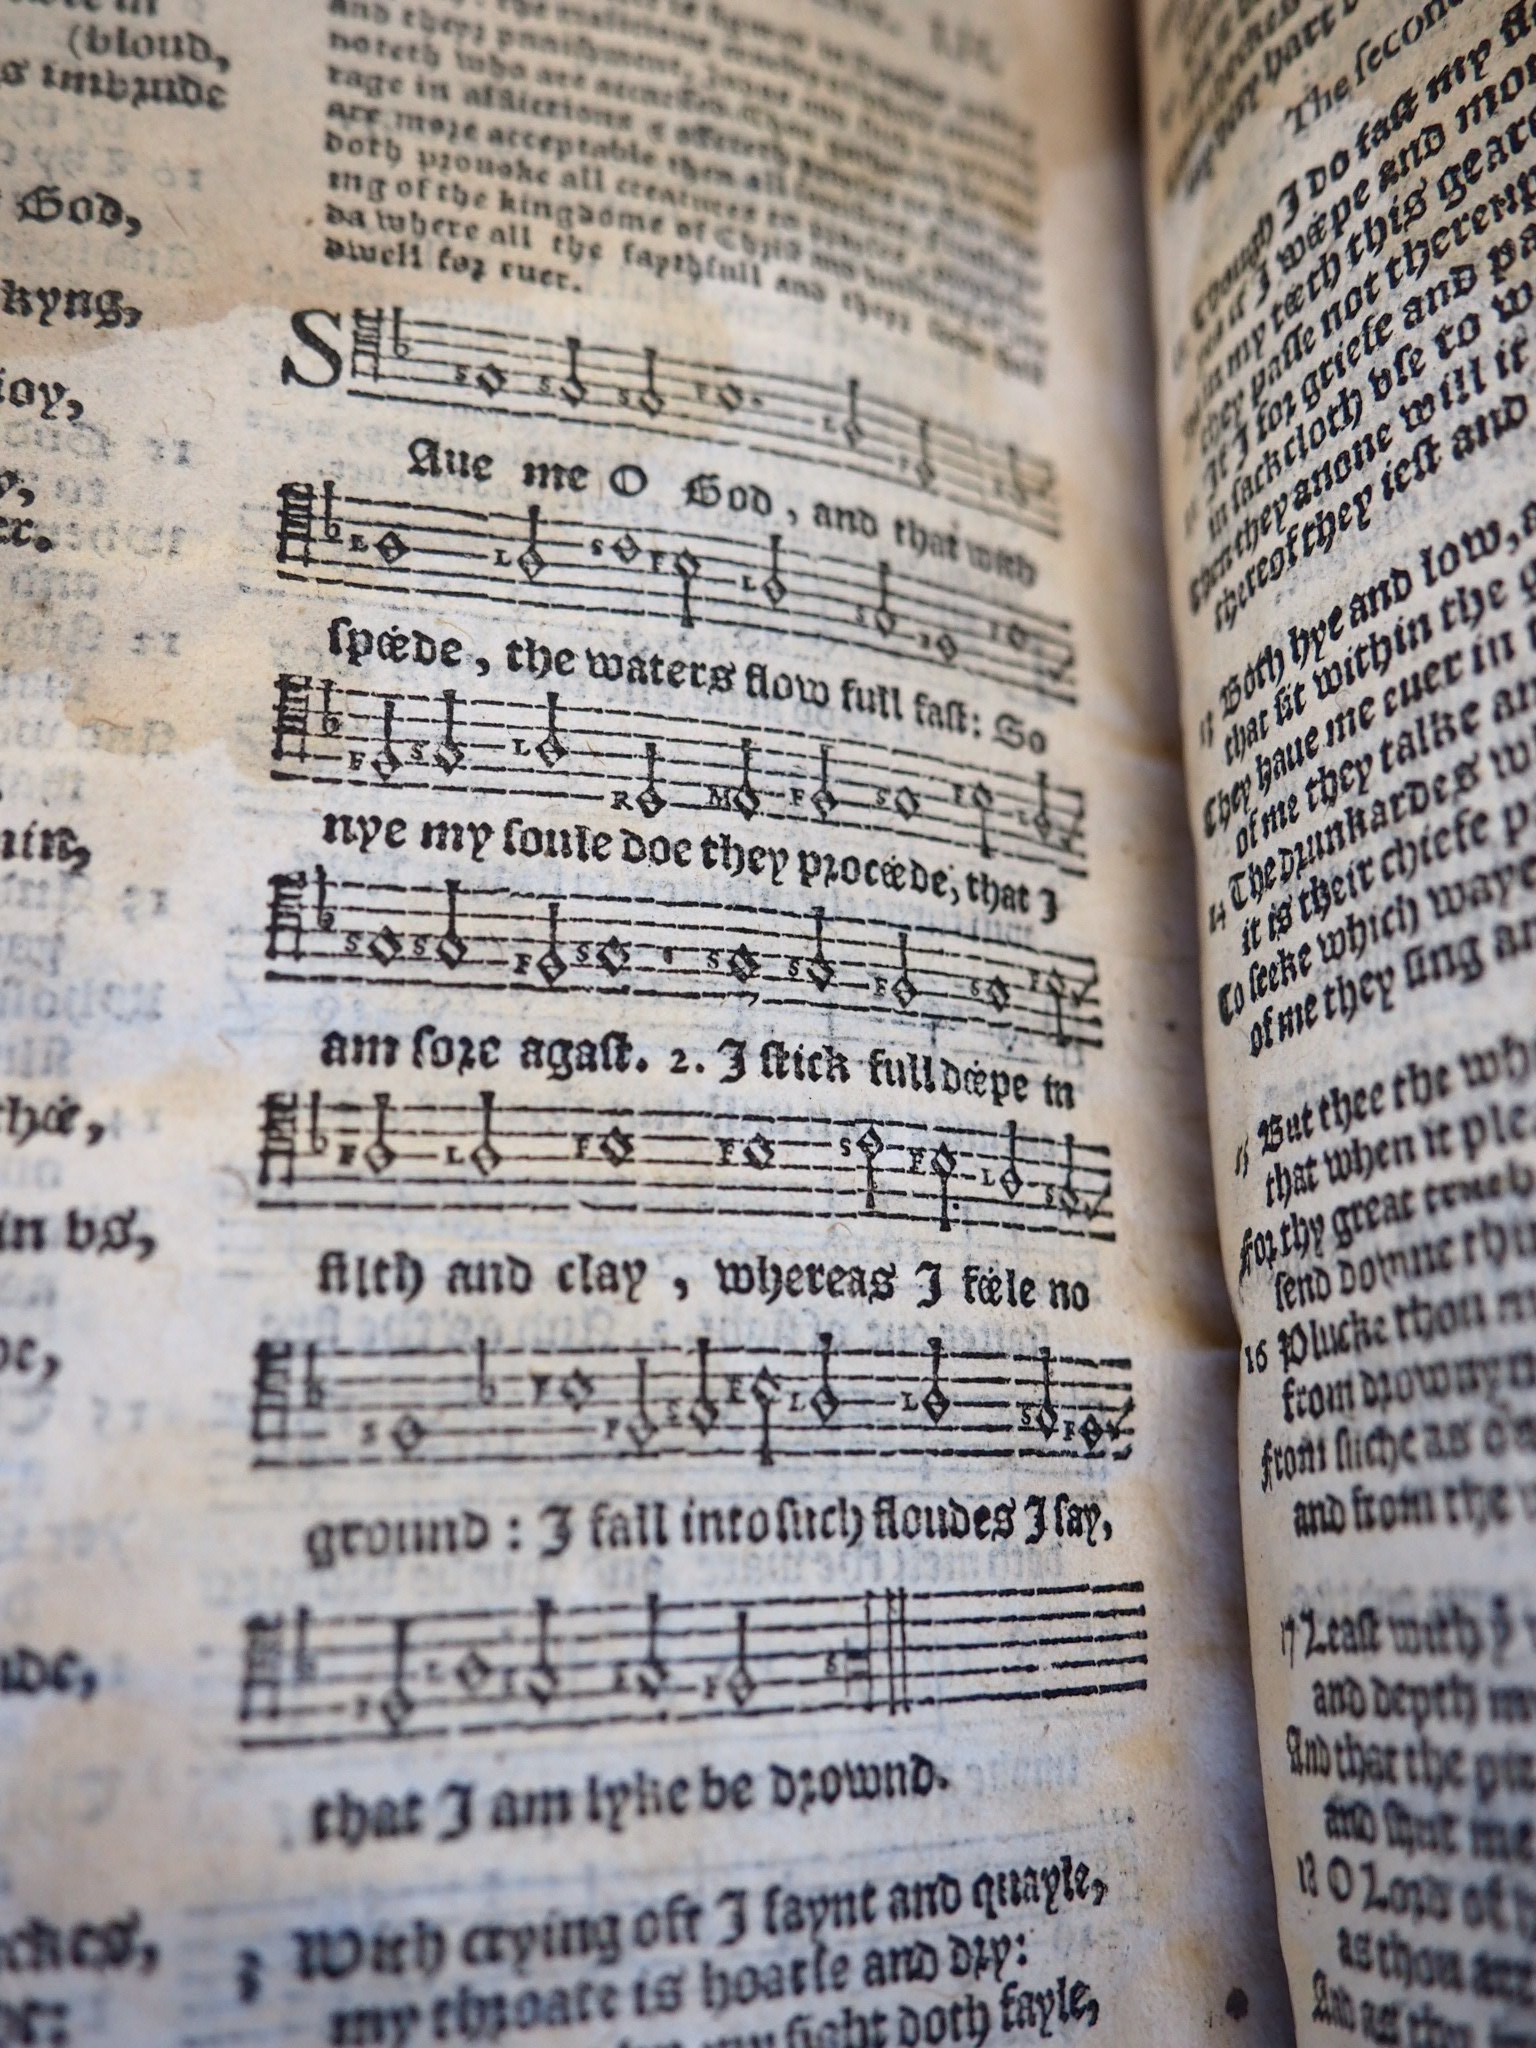 Photograph of hymn music in a 16th century bible.